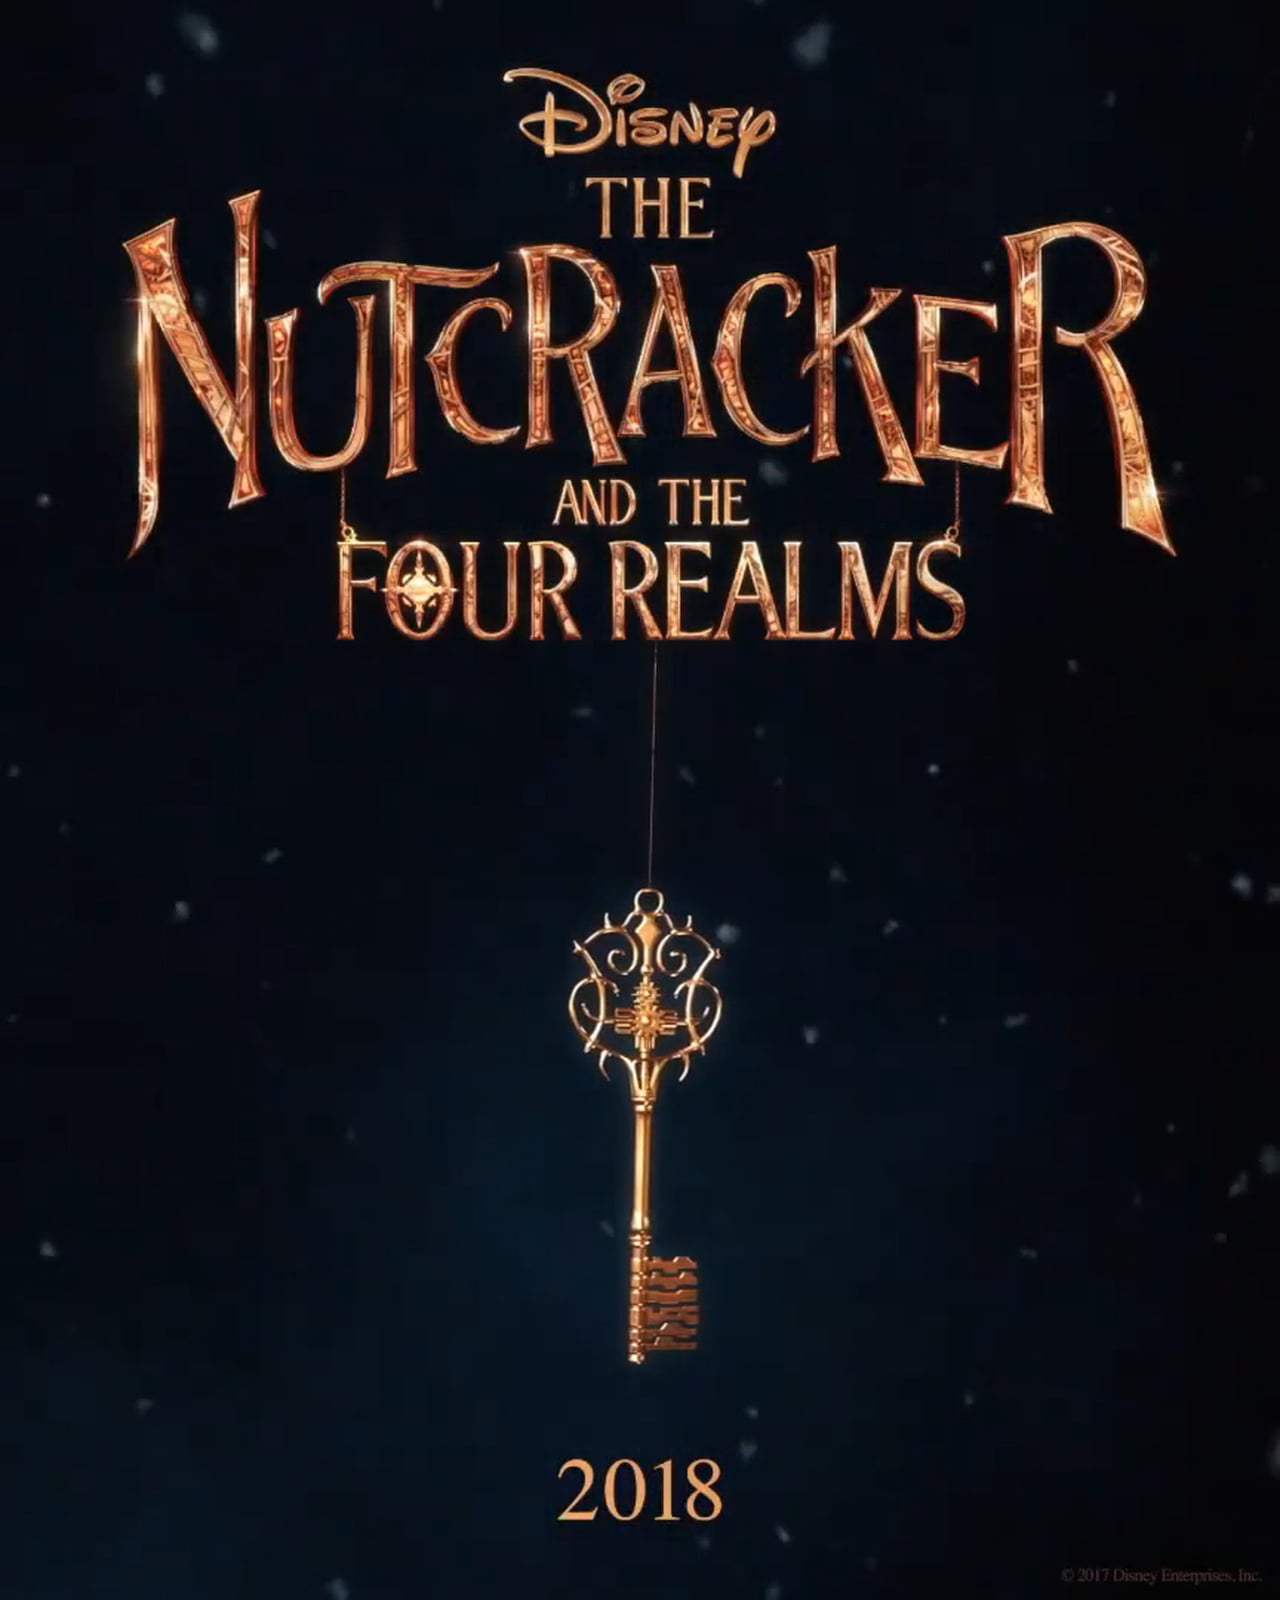 The Nutcracker and the Four Realms Motion Poster (2018)